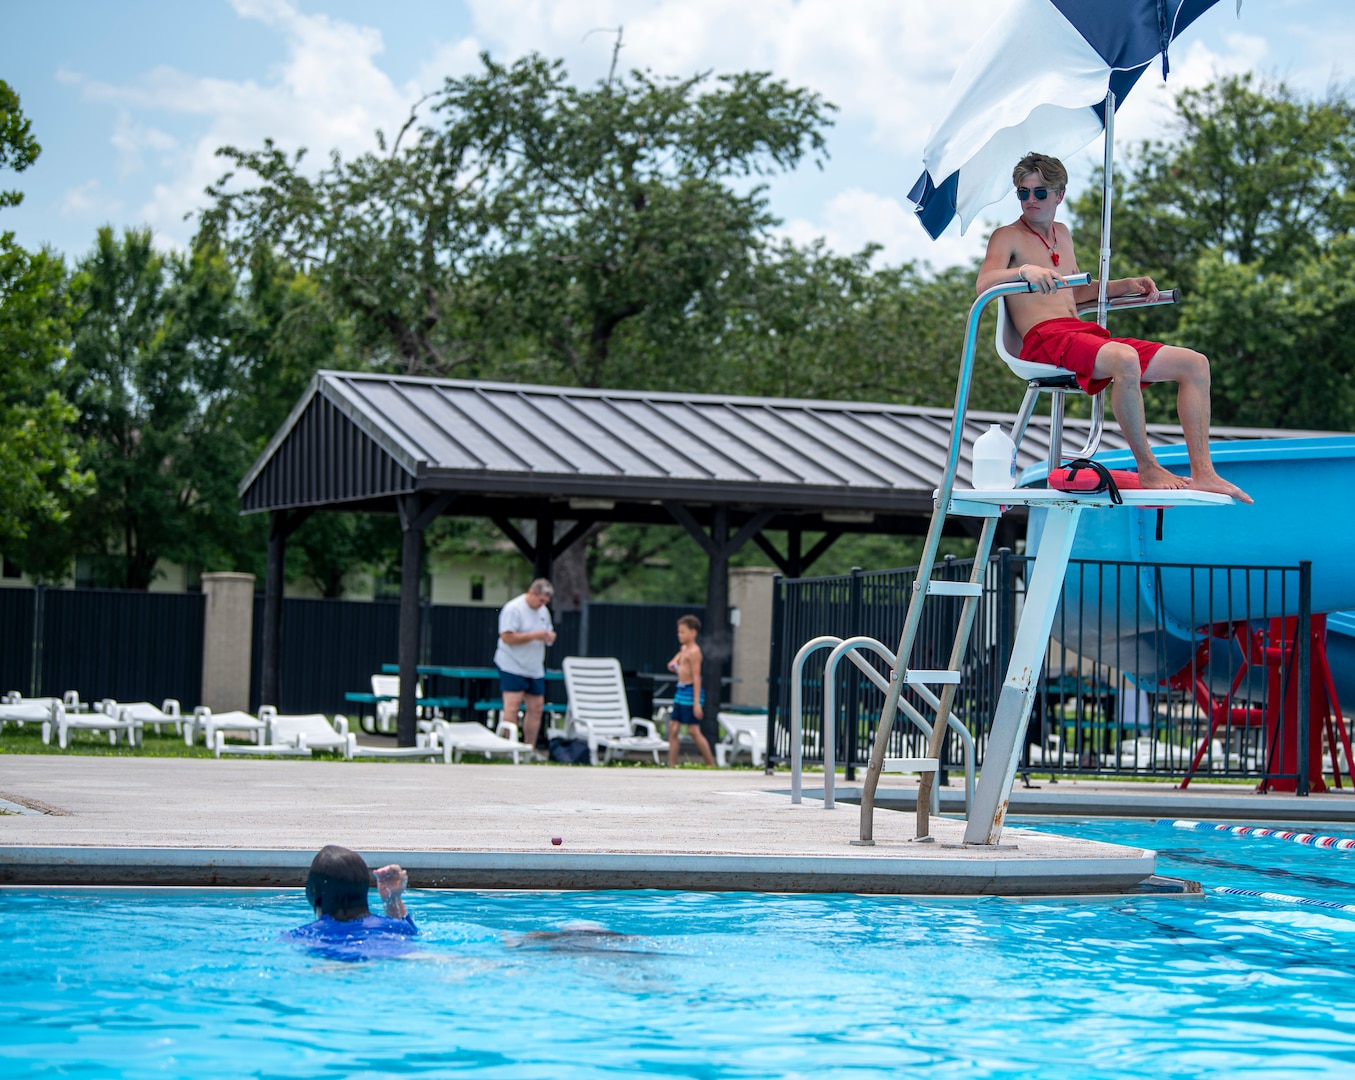 A lifeguard with the 436th Force Support Squadron, overlooks the Oasis Pool to ensure swimmers are safe at Dover Air Force Base, Del., July 14, 2021. During summer break, the pool is open 11 am to 7 pm daily for military members, family and friends. The pool no longer has block sessions for attendees, but has a capacity limit of 200 people.  (U.S. Air Force photo by Tech. Sgt. Nicole Leidholm)